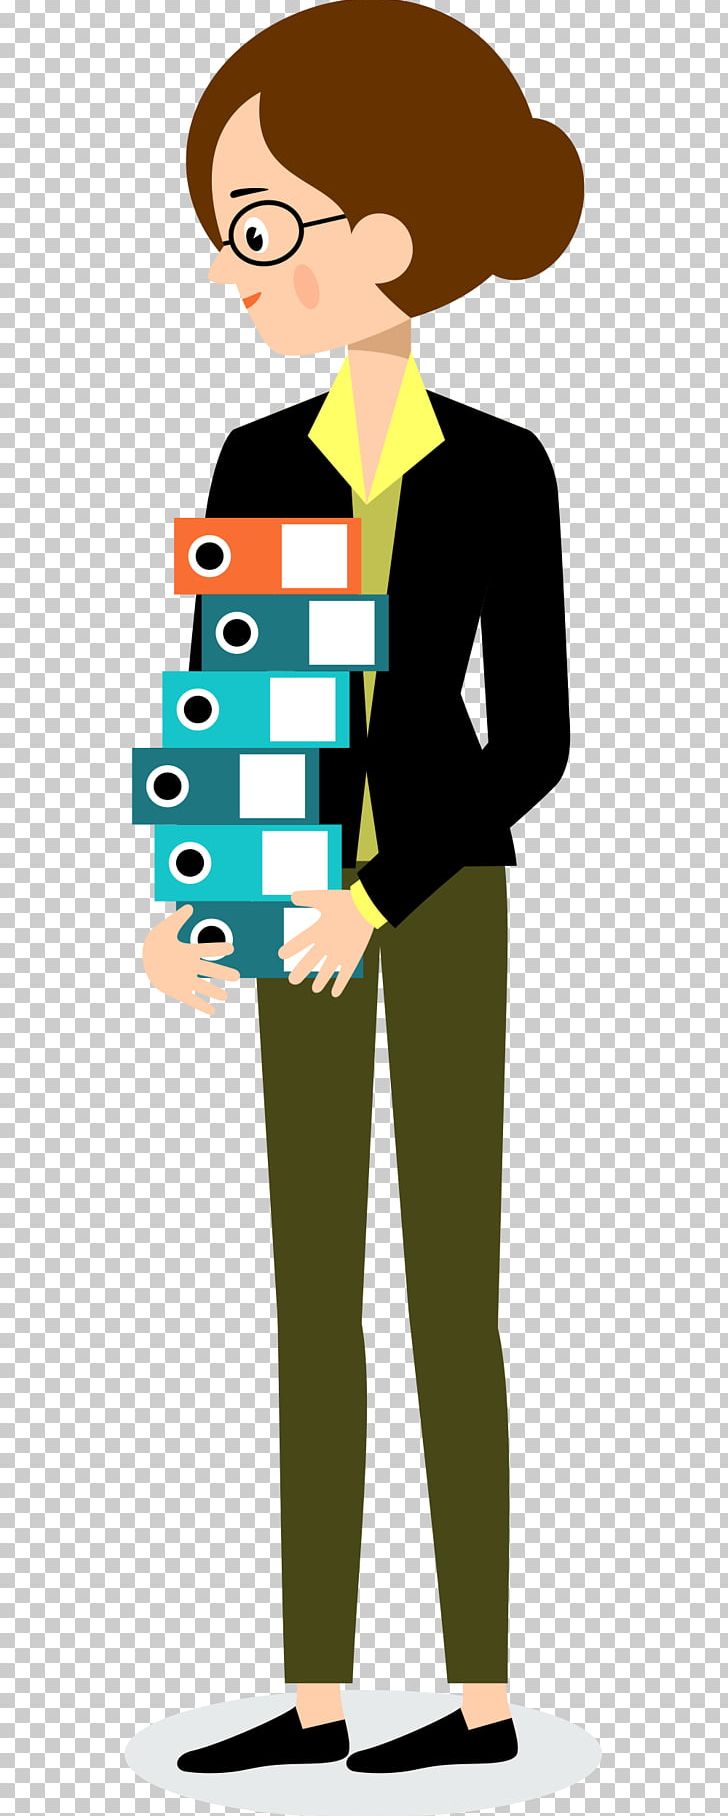 Cartoon Illustration PNG, Clipart, Business, Business Card, Business Man, Business Woman, Cartoon Free PNG Download